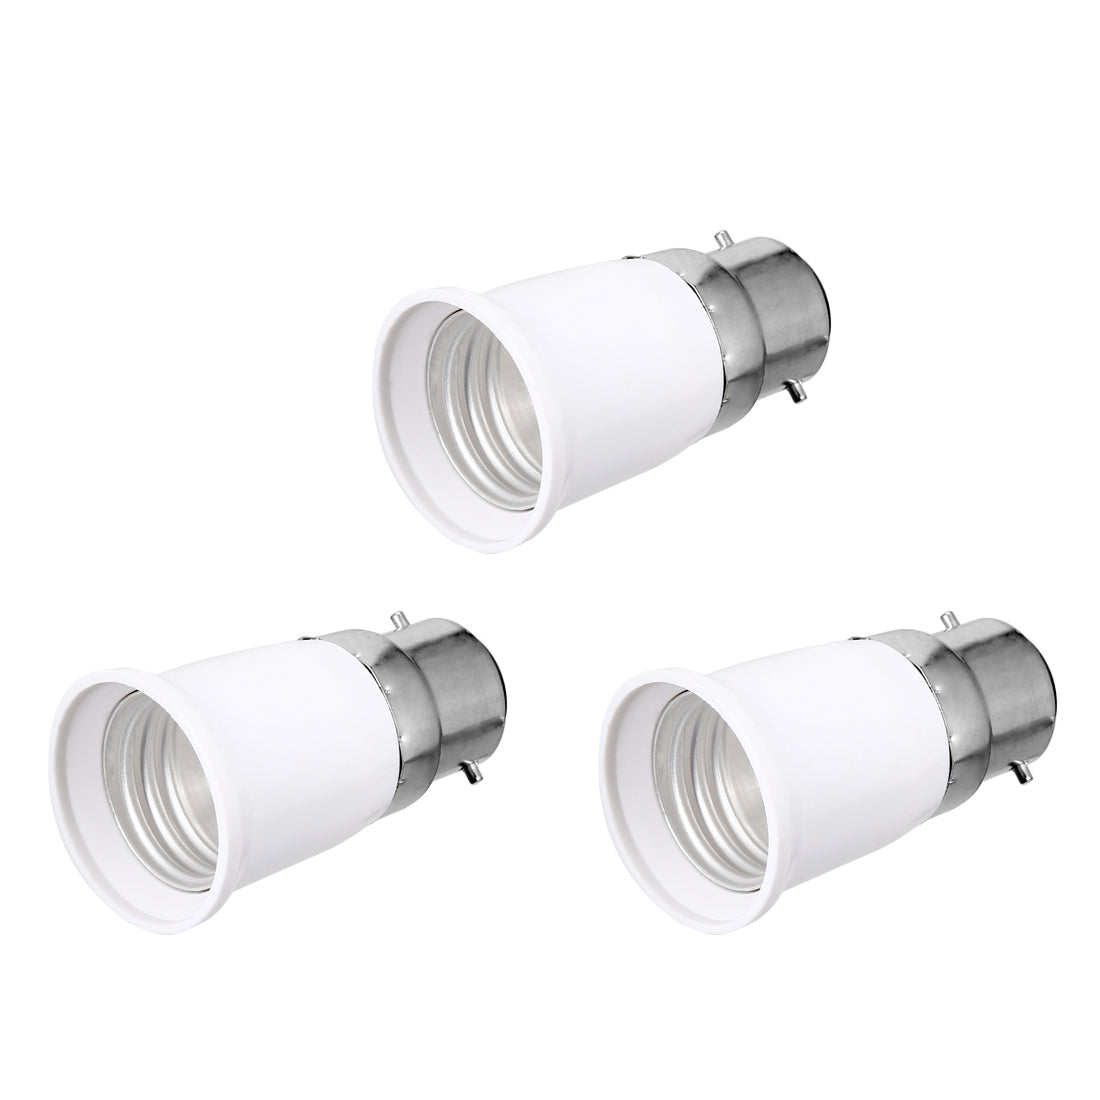 uxcell Uxcell 3pcs AC 90-240V 4A B22 to E27 Socket Adapter PBT Lamp Bulb Holder 200 Degree Heat Resistant